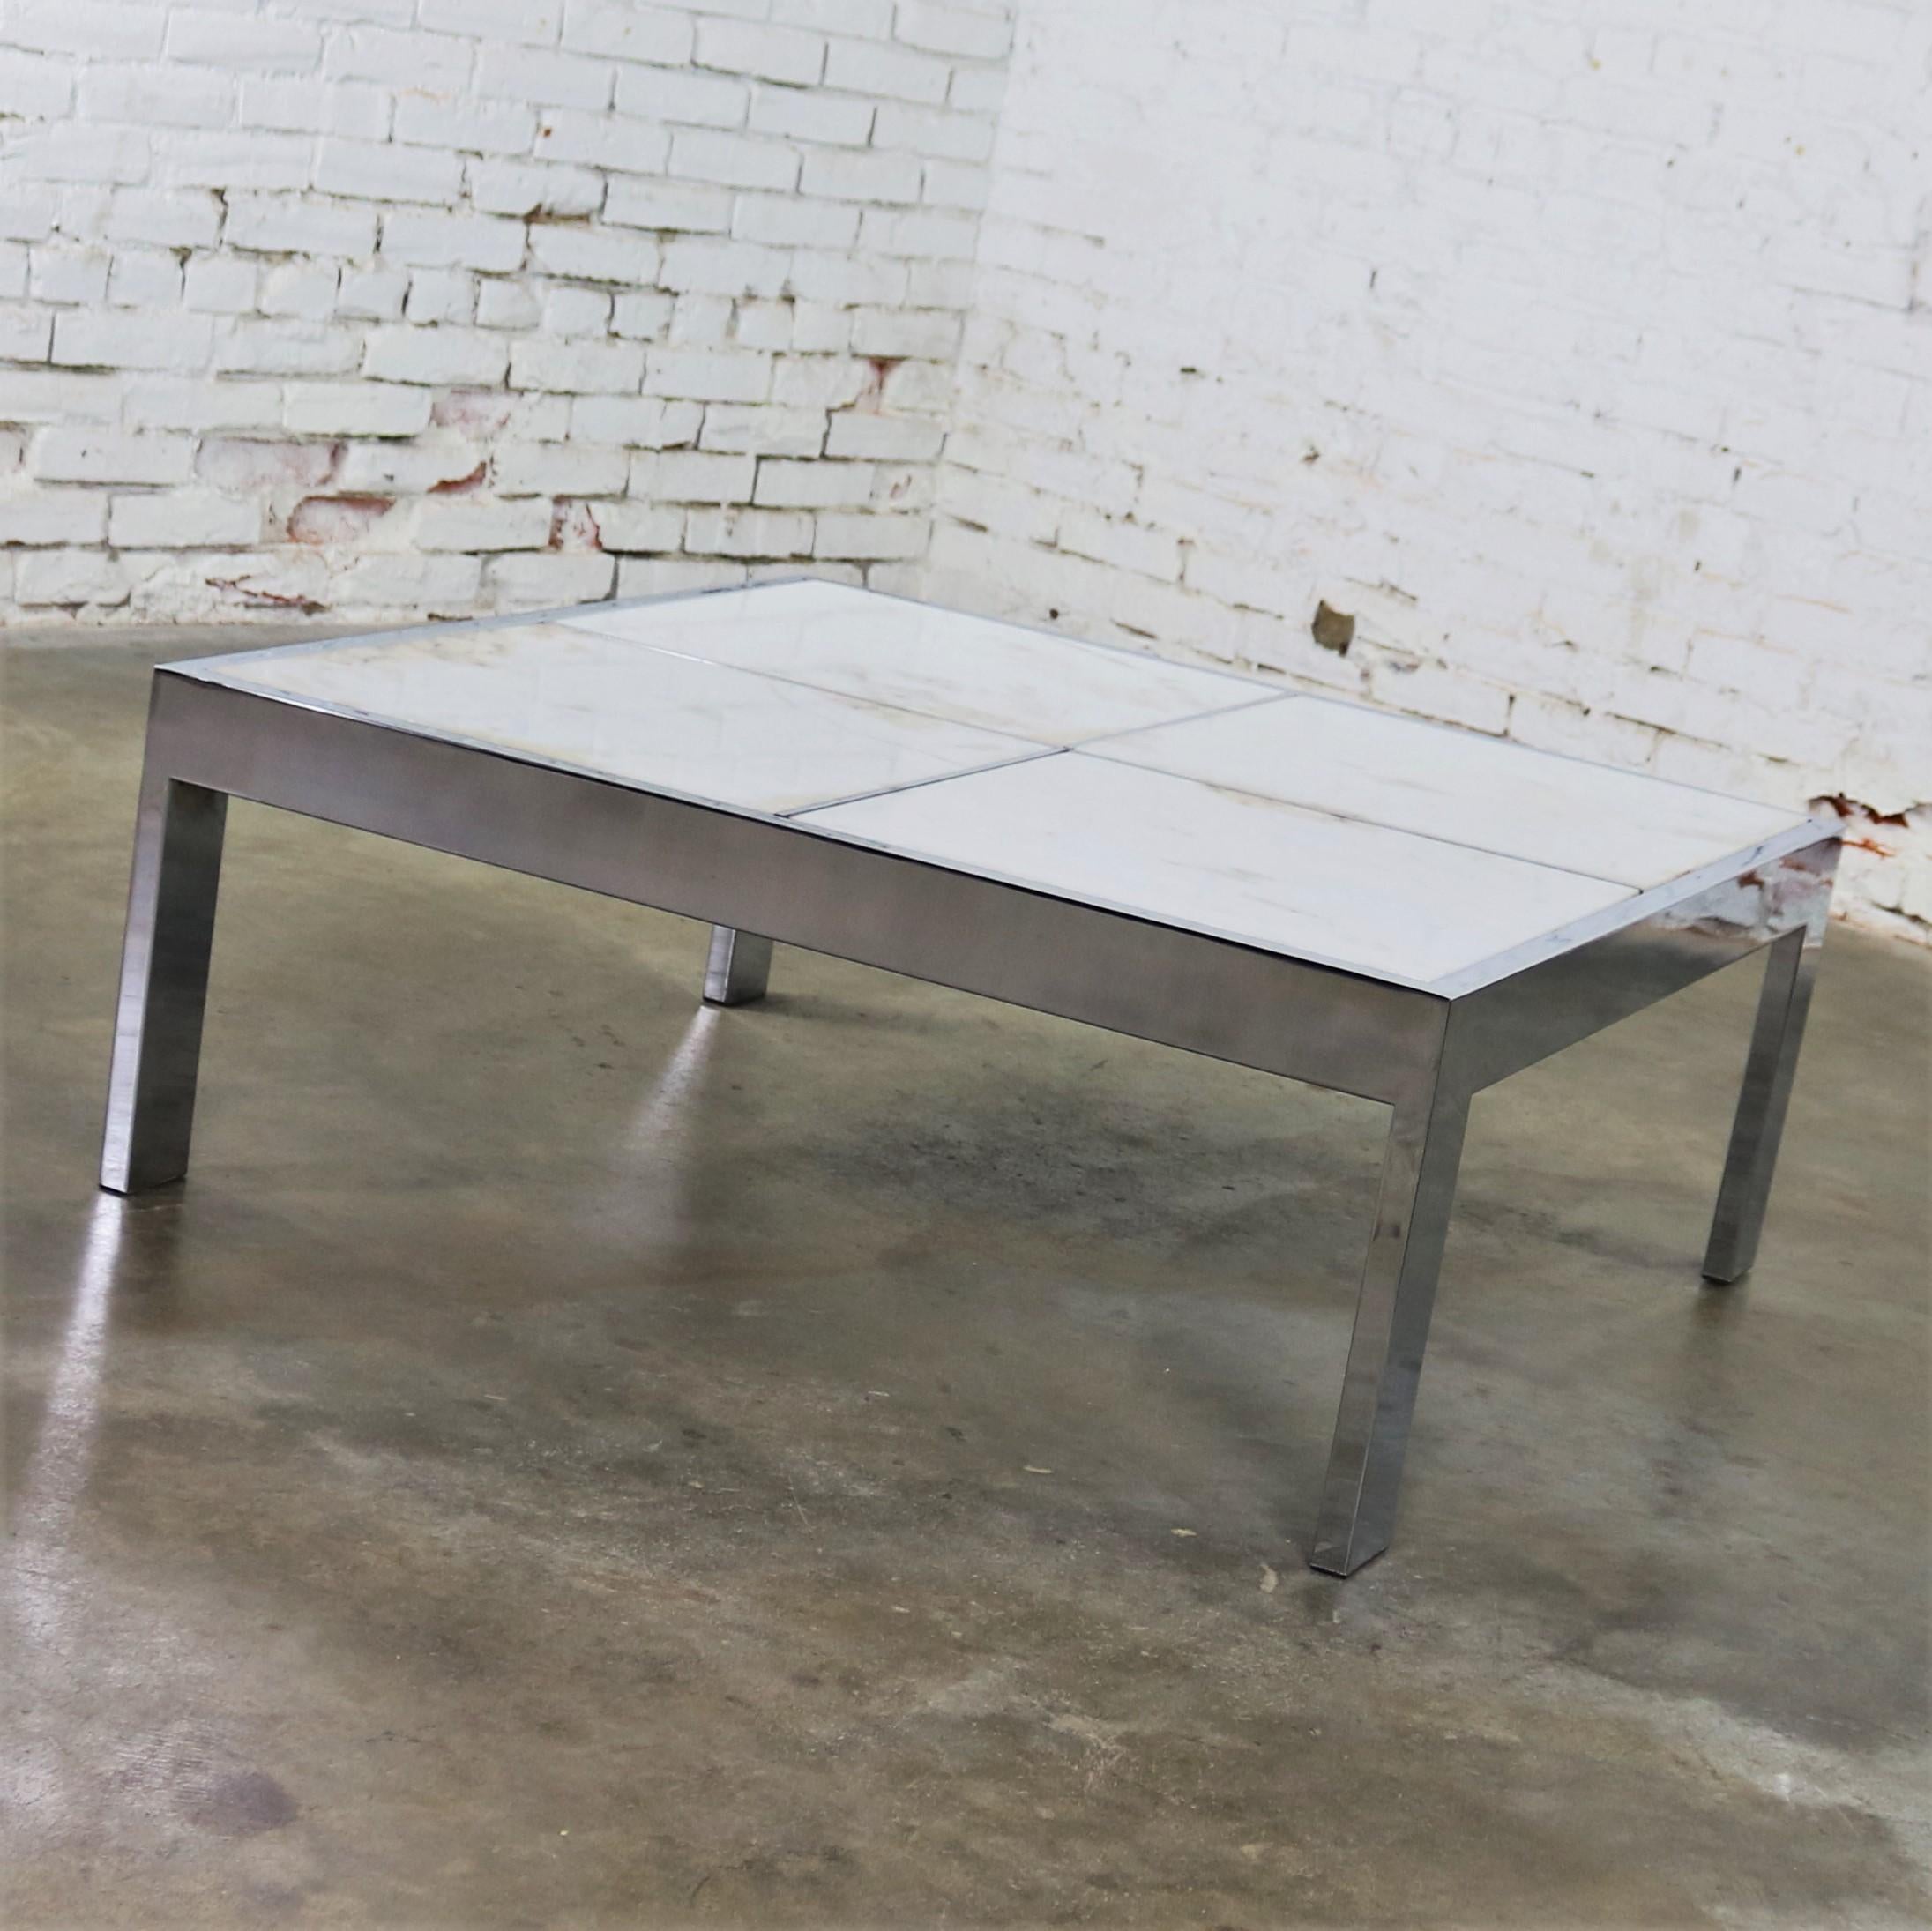 20th Century Modern Chrome and White Marble Coffee Table Attributed to the Pace Collection For Sale